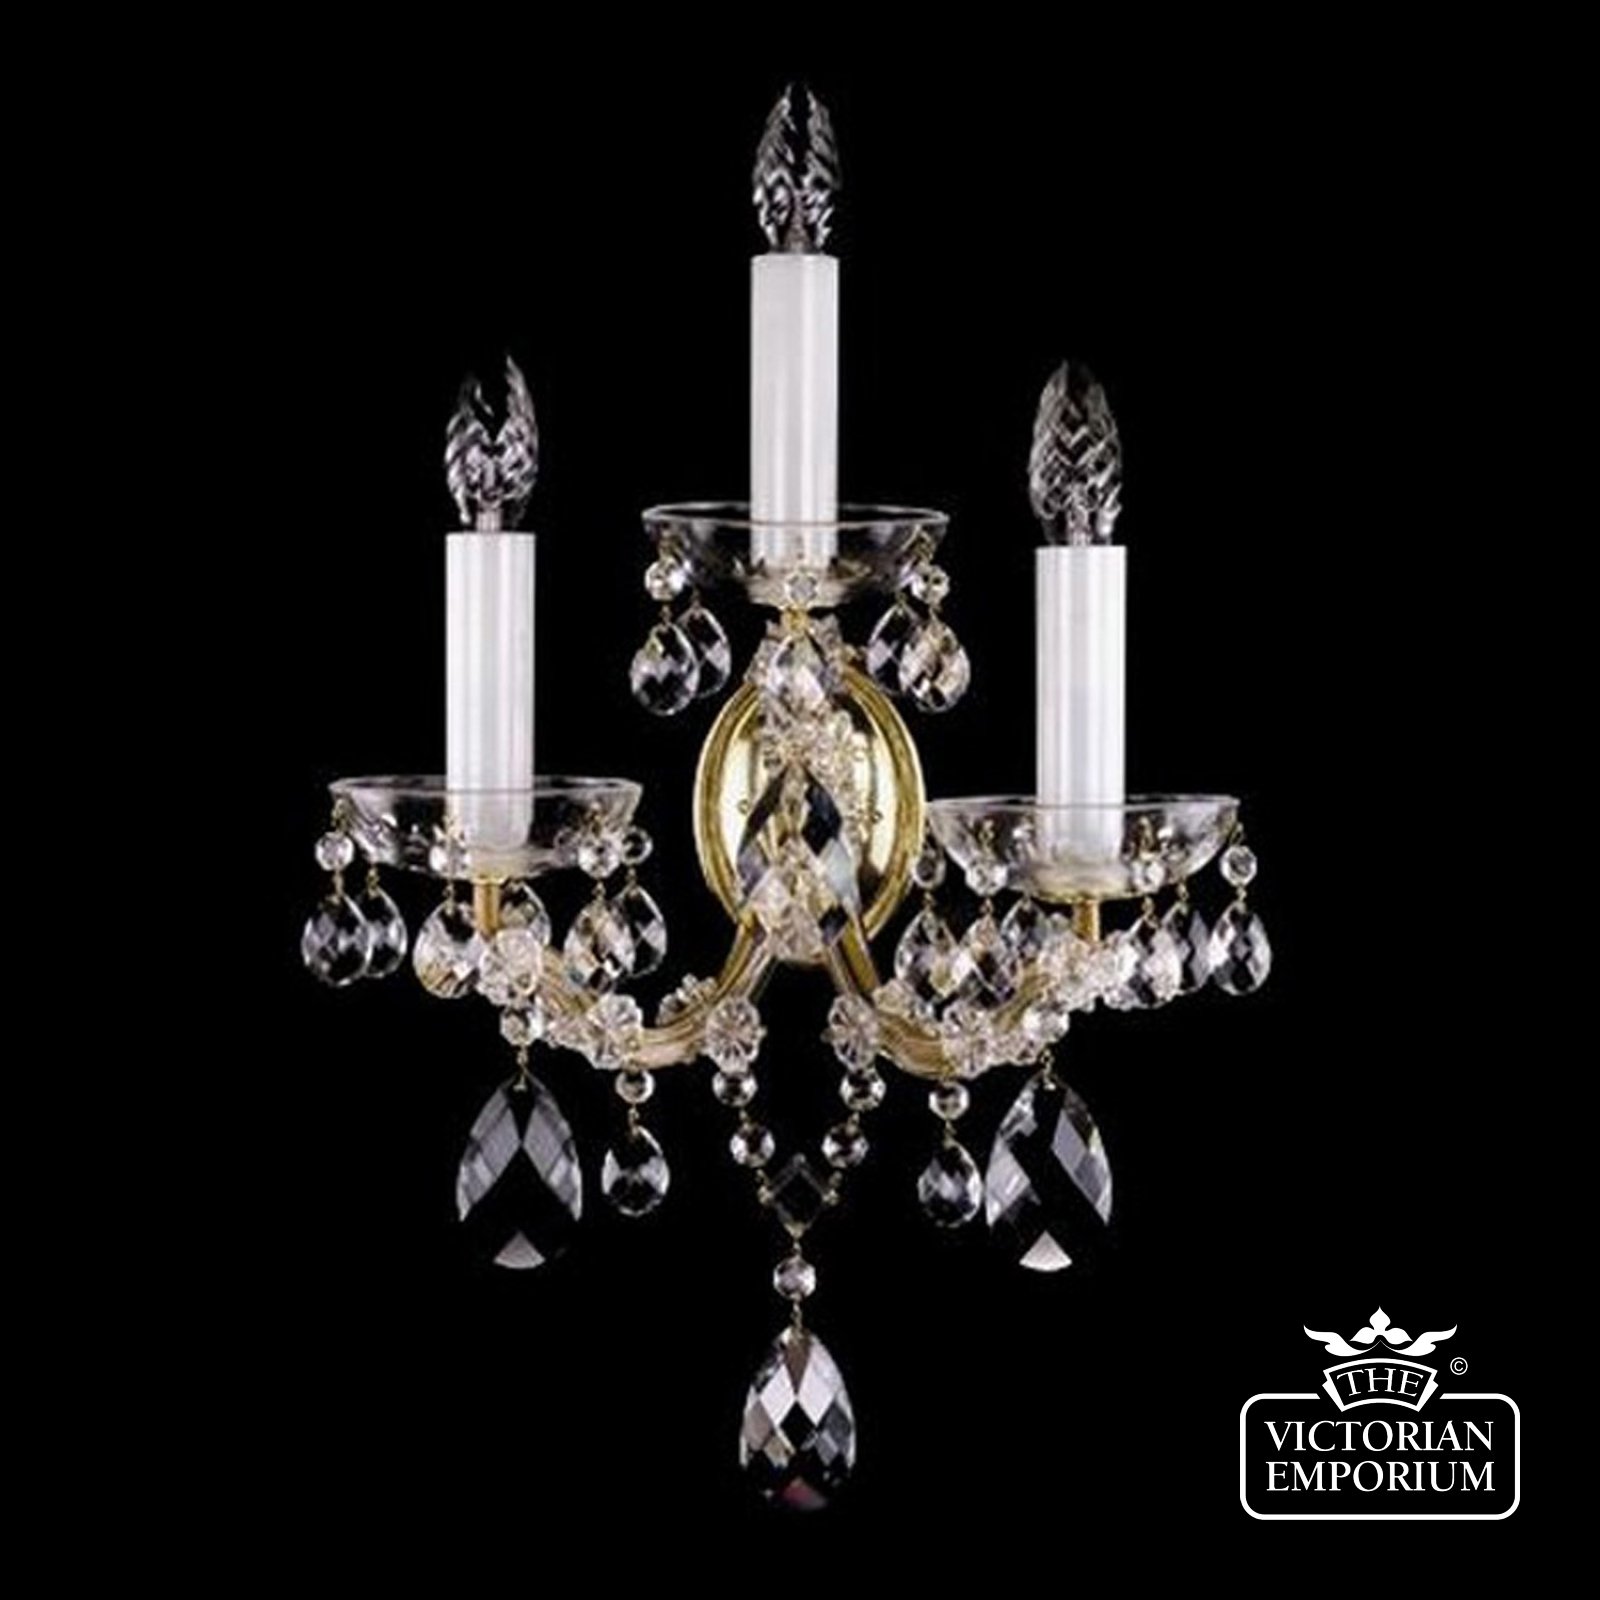 3 Arm Wall Sconce Lights with oval shape crystal drops